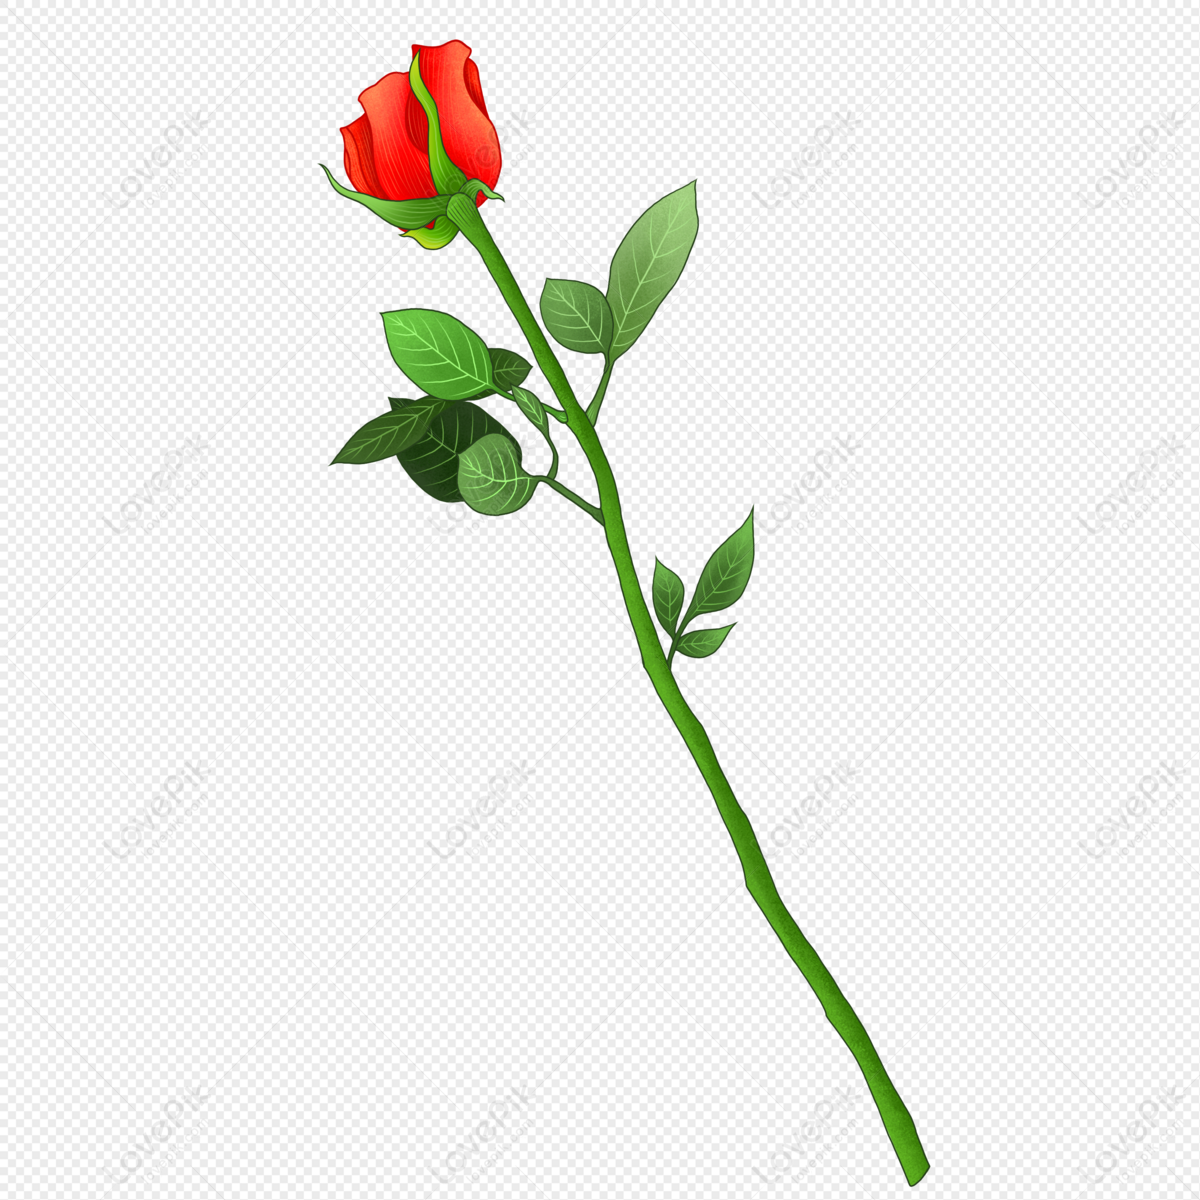 Red Cartoon Rose Flower PNG Image And Clipart Image For Free Download -  Lovepik | 401671548